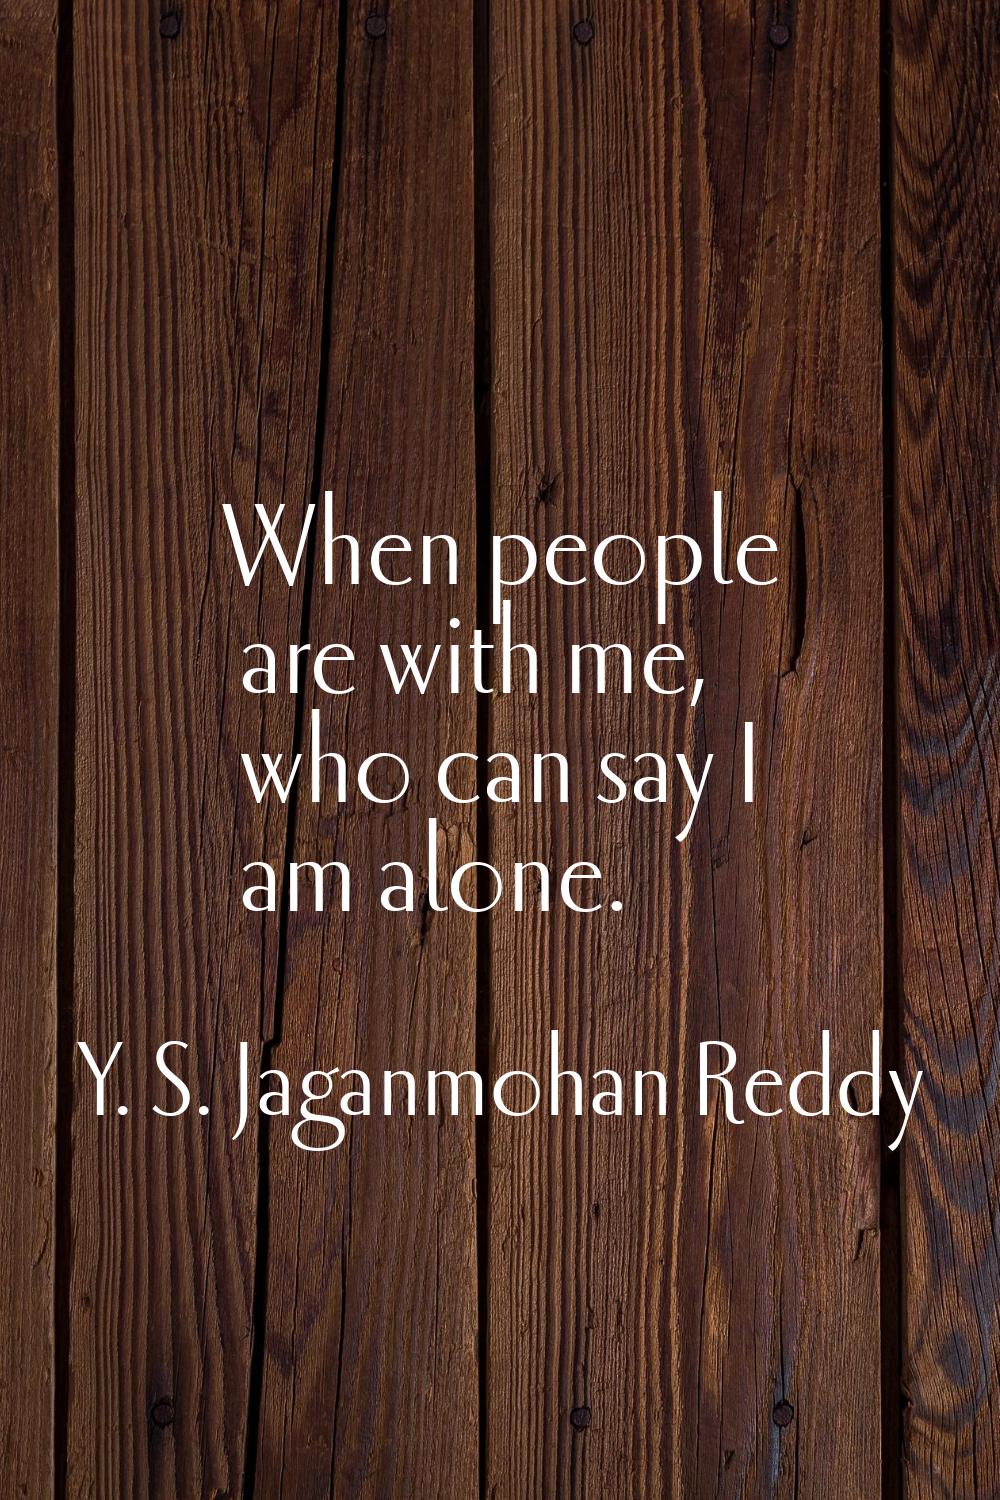 When people are with me, who can say I am alone.